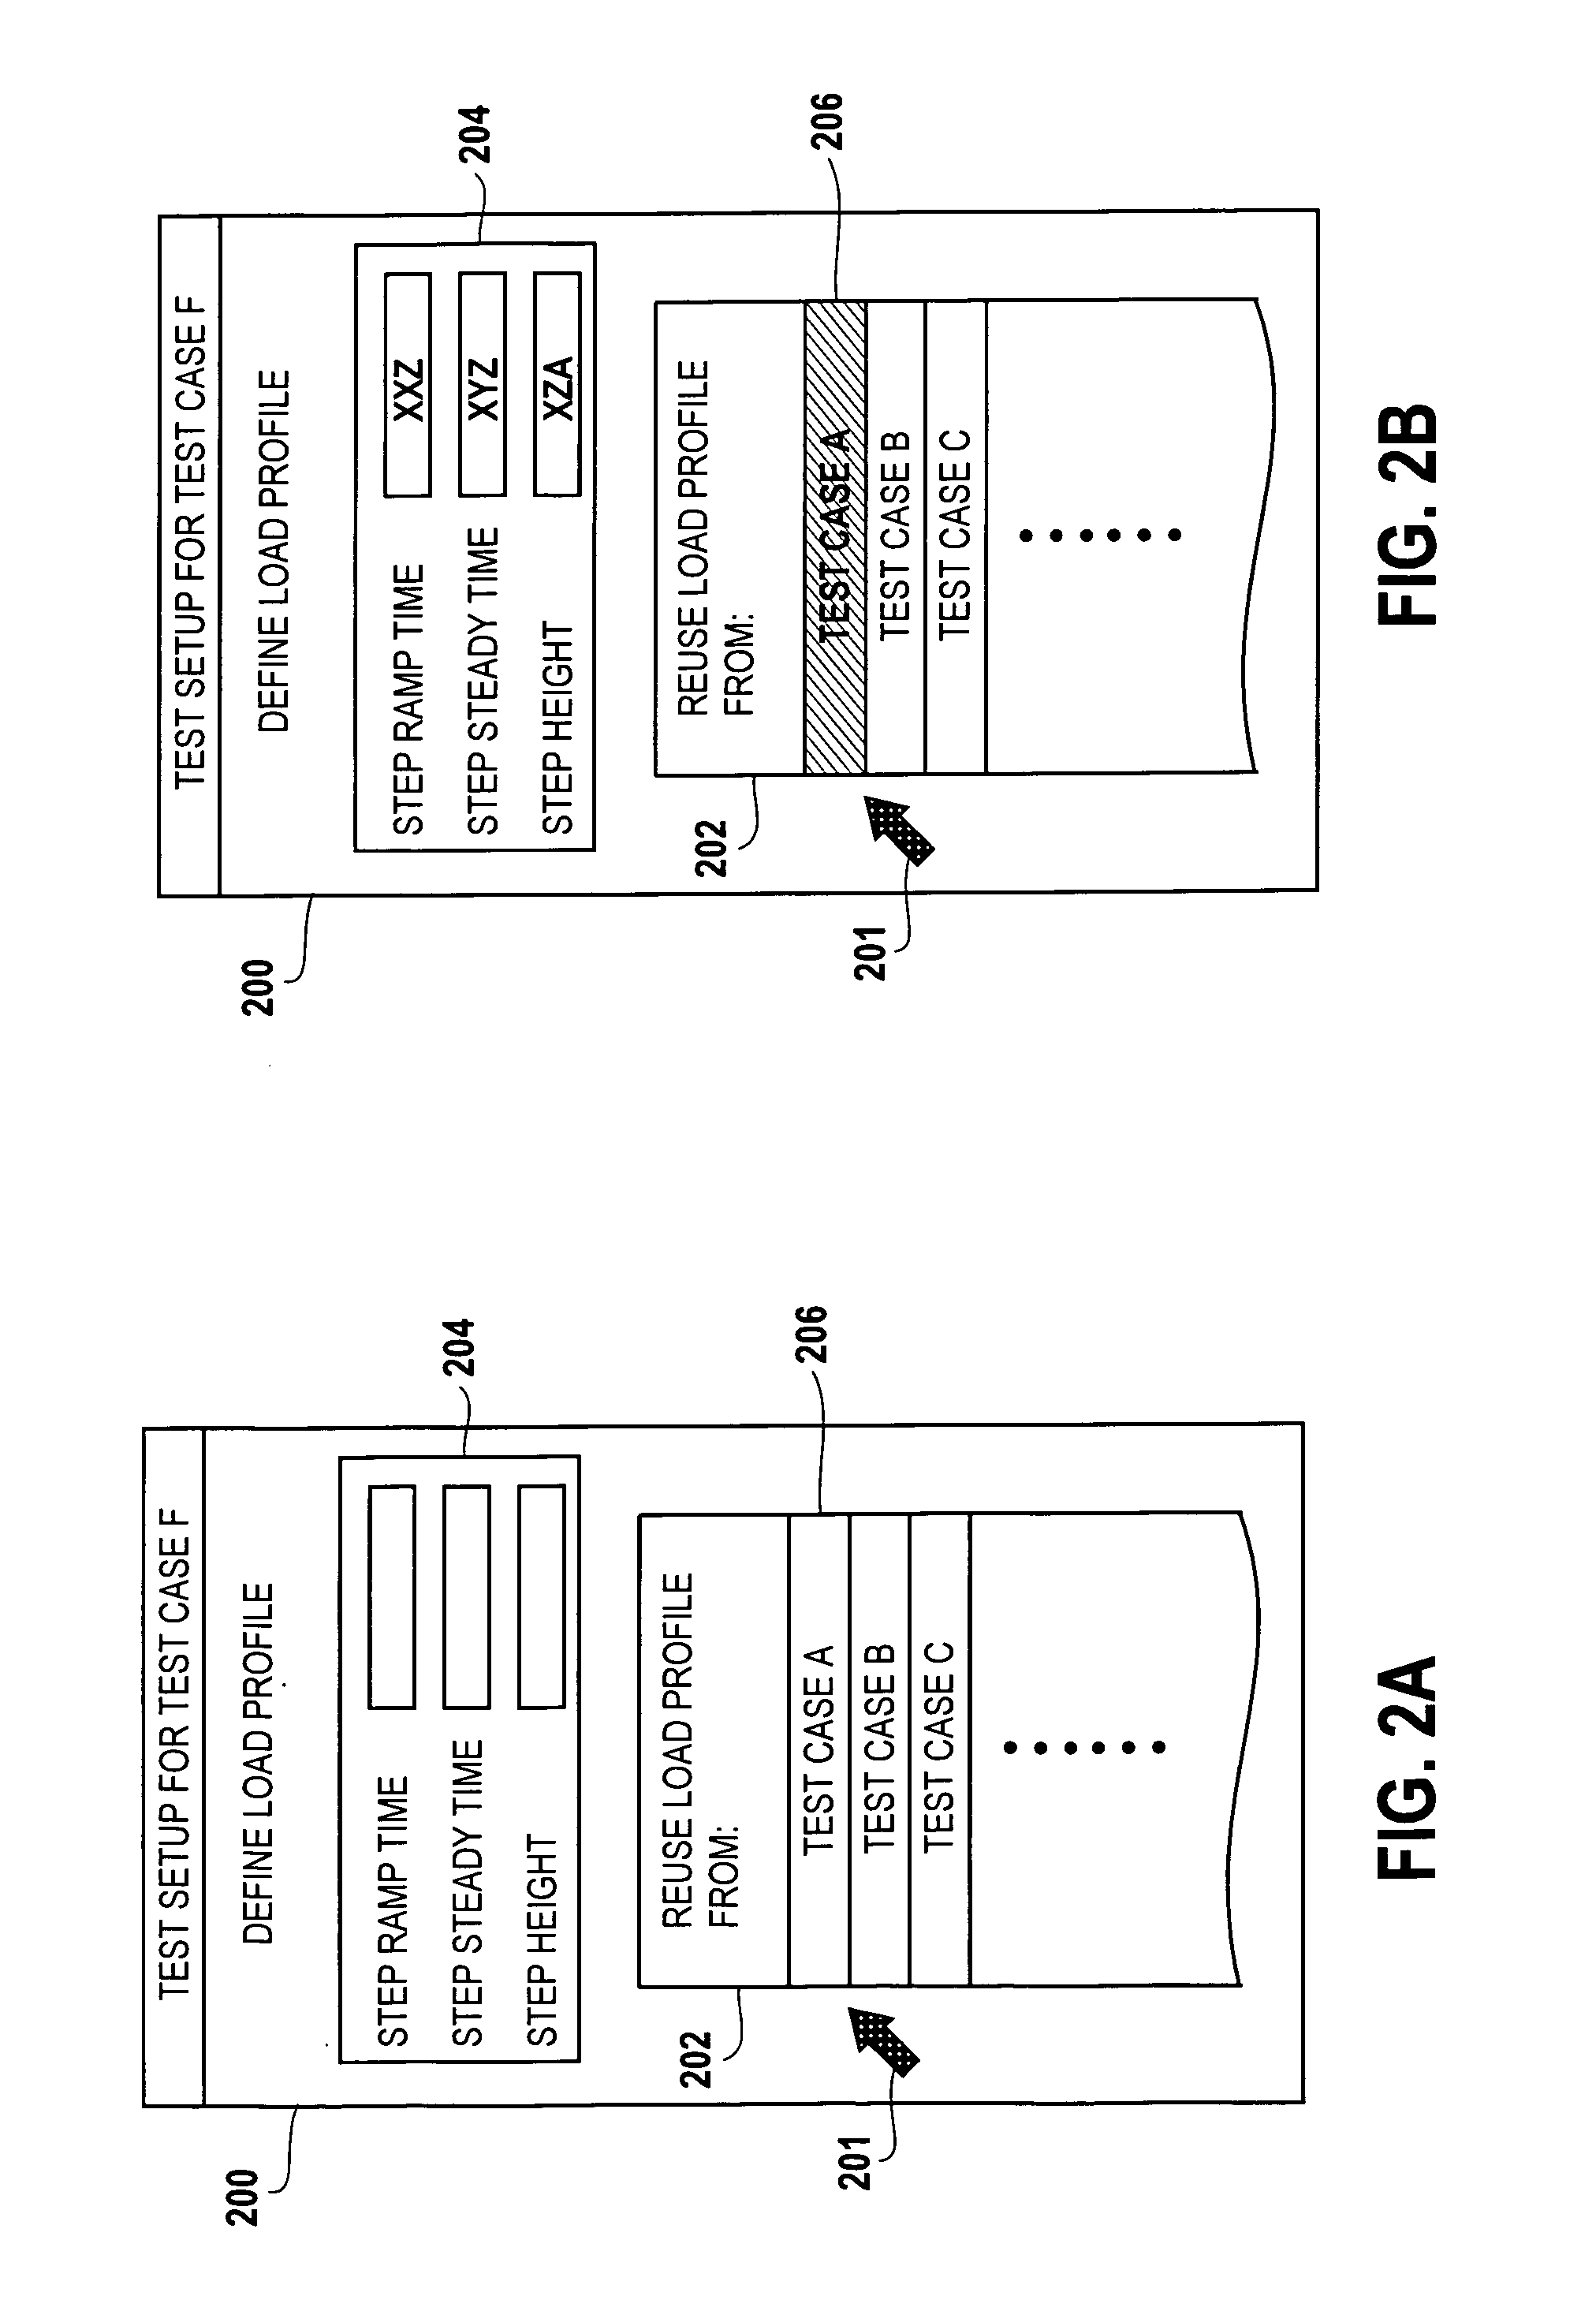 Systems and methods for configuring a test setup